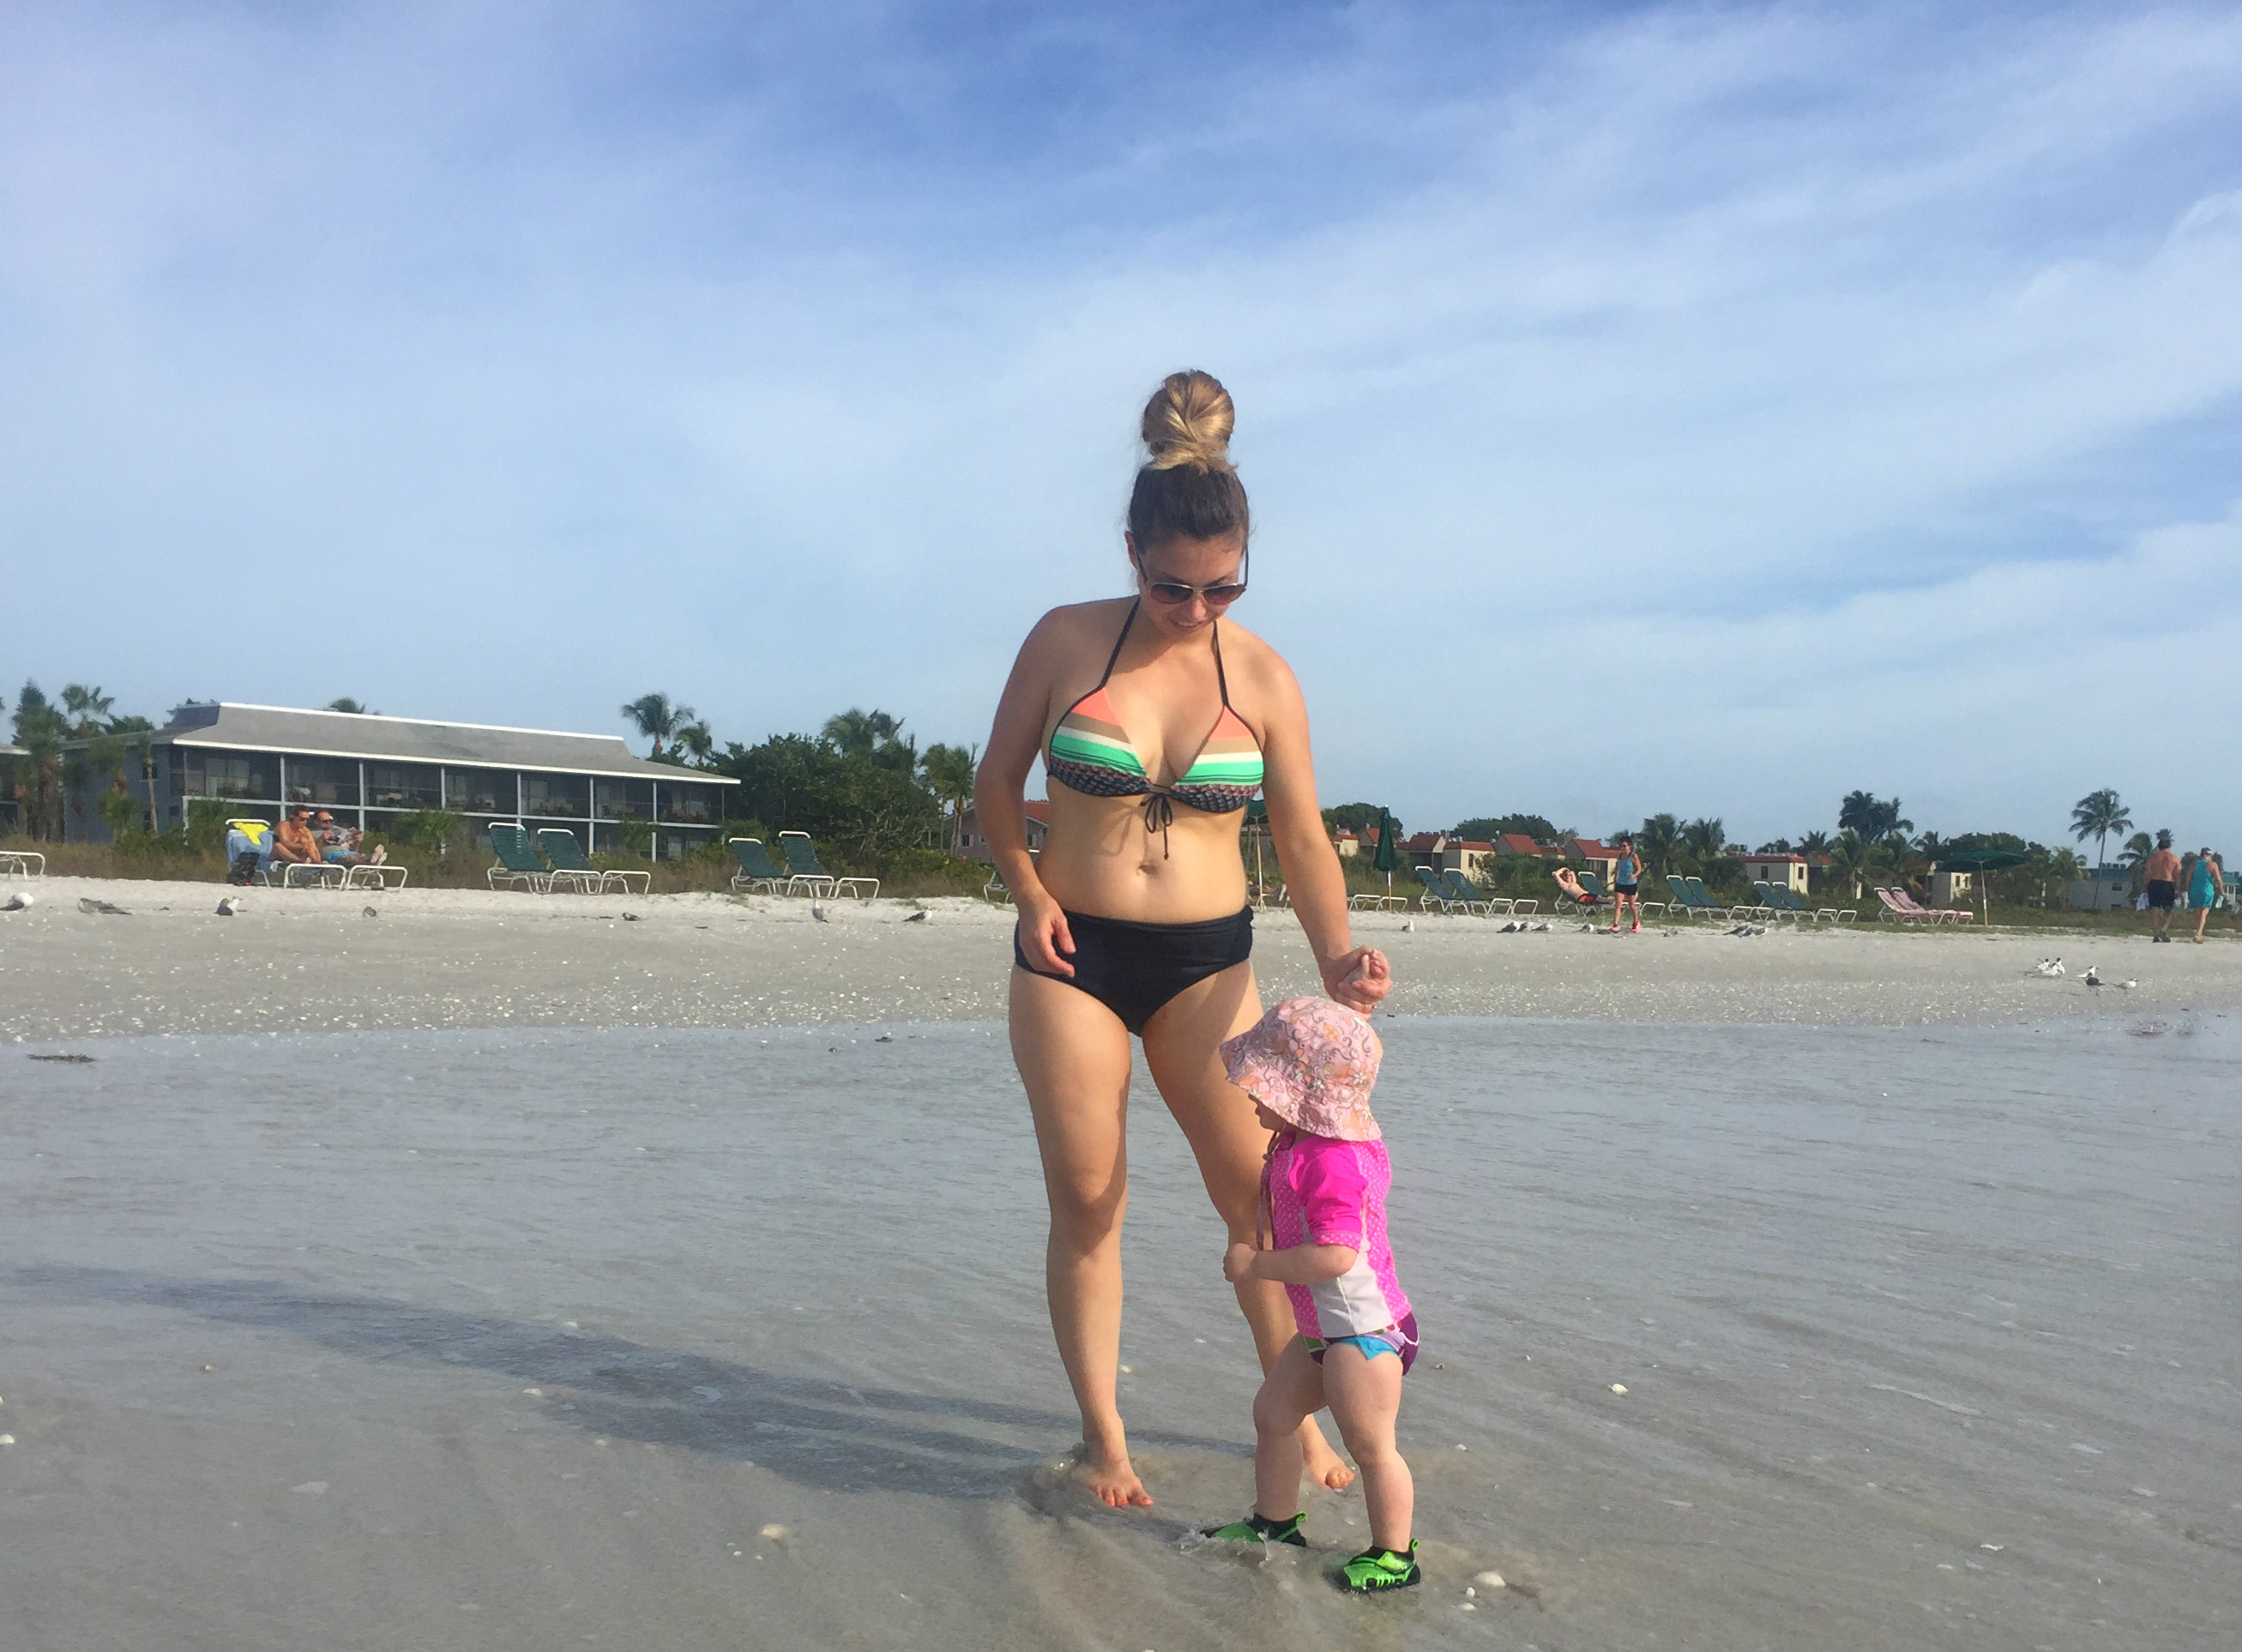 With toddler on beach